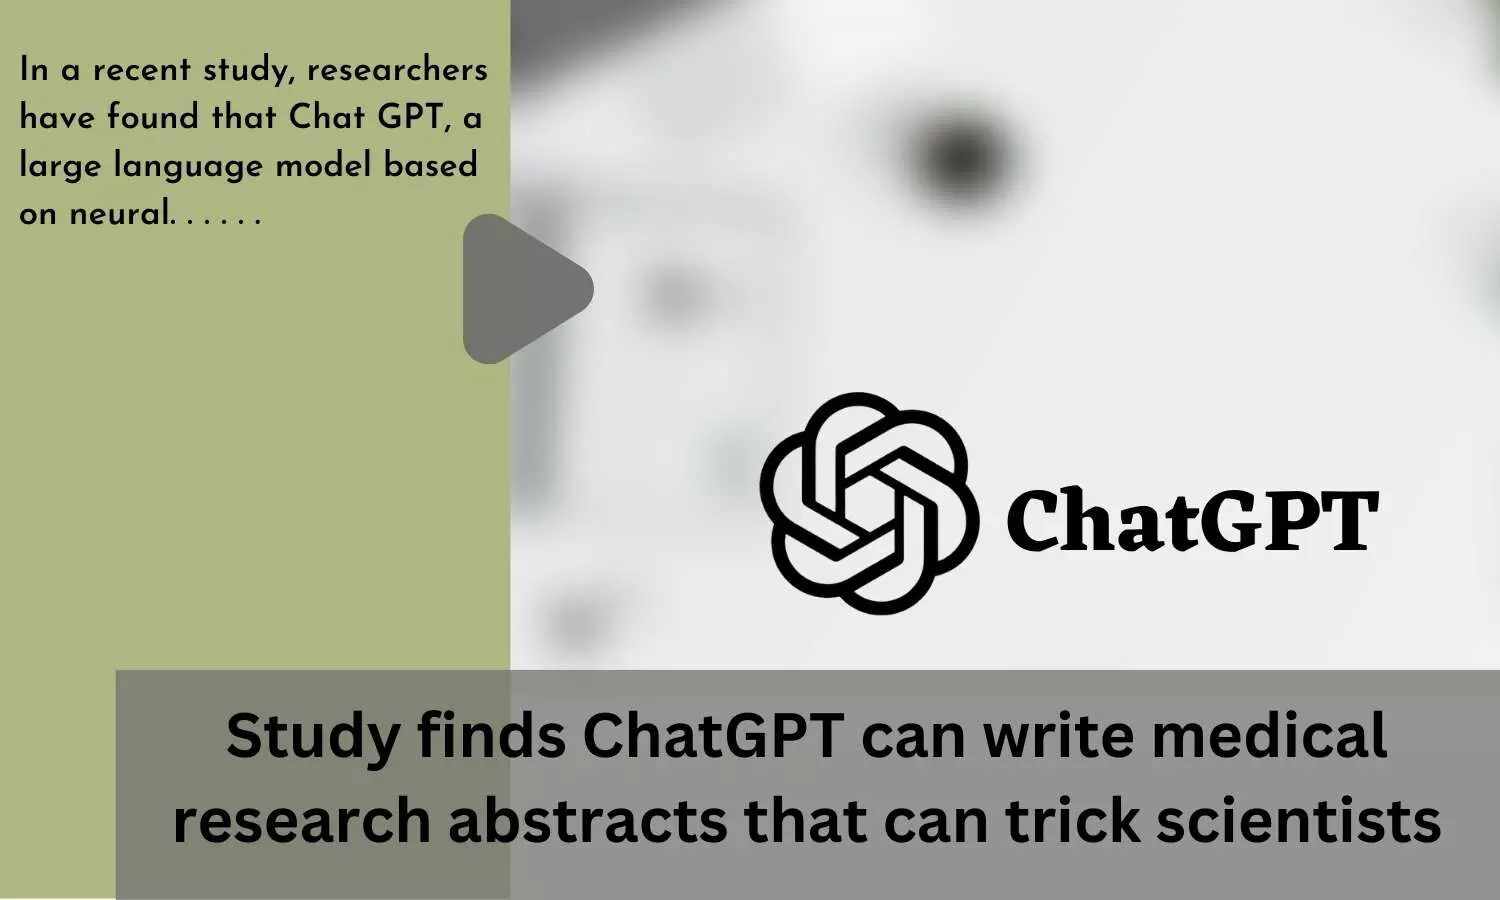 Study finds ChatGPT can write medical research abstracts that can trick scientists